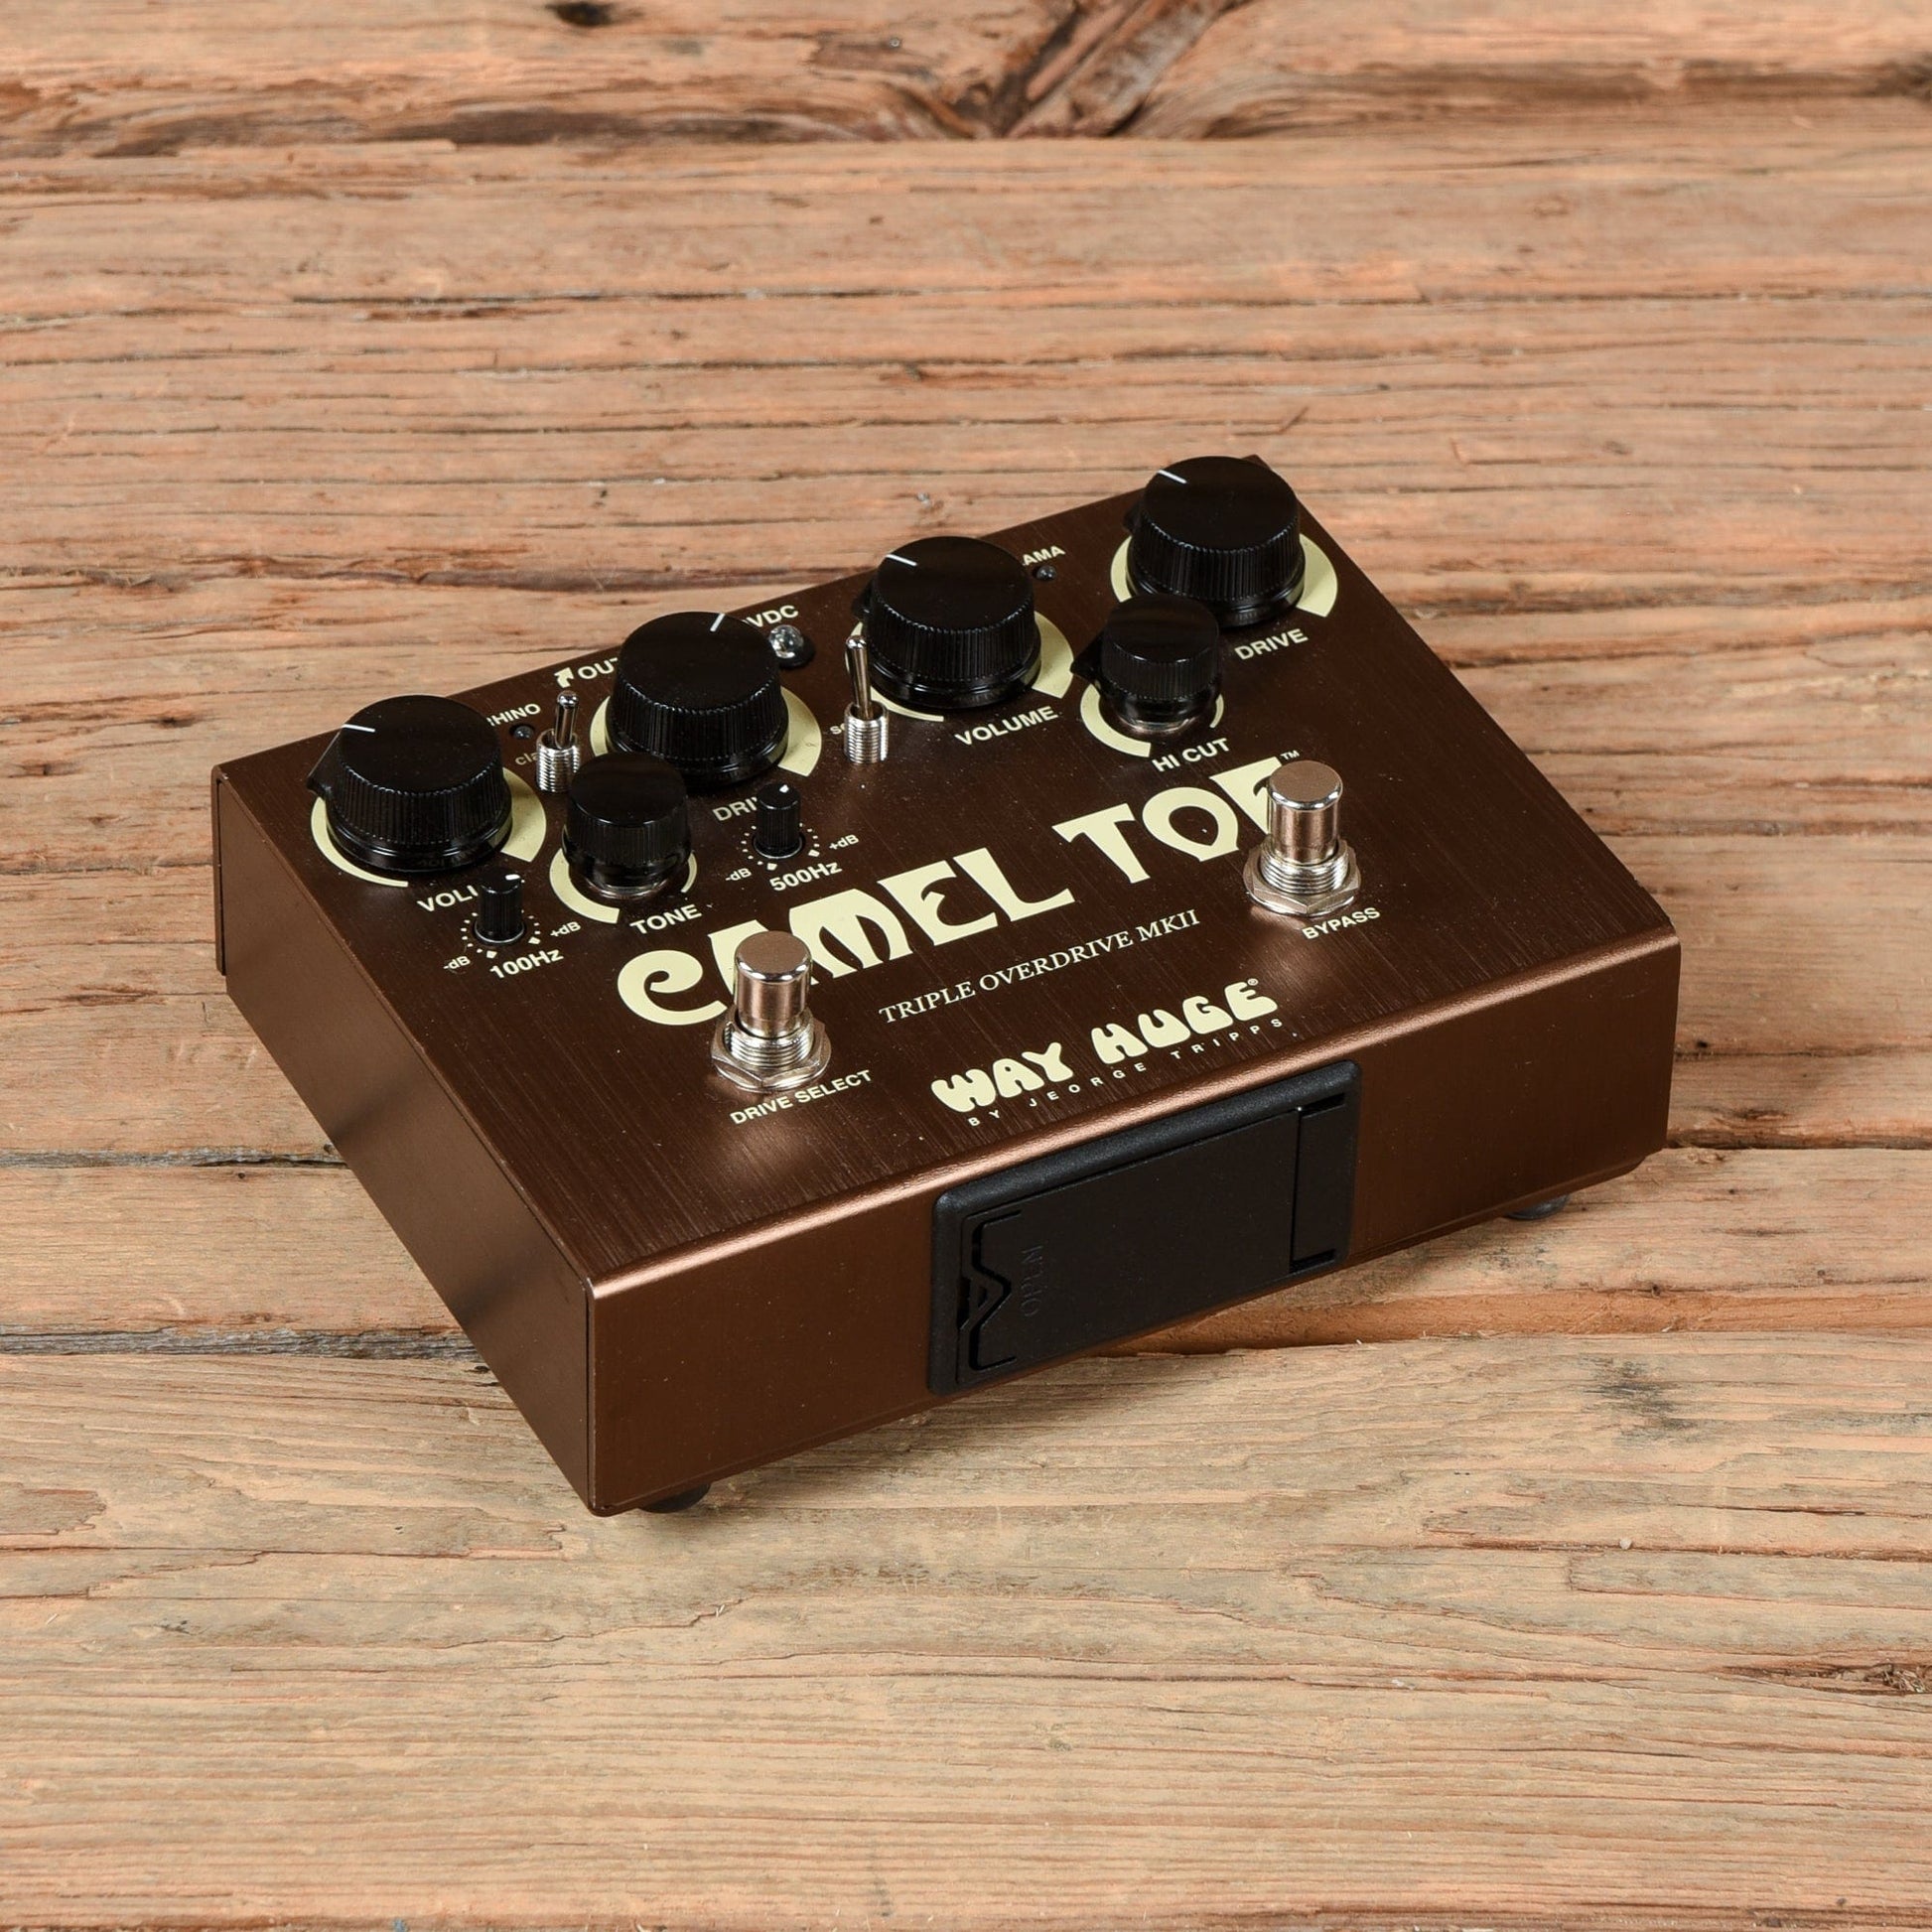 Way Huge WHE209 Camel Toe MkII Triple Overdrive Effects and Pedals / Overdrive and Boost